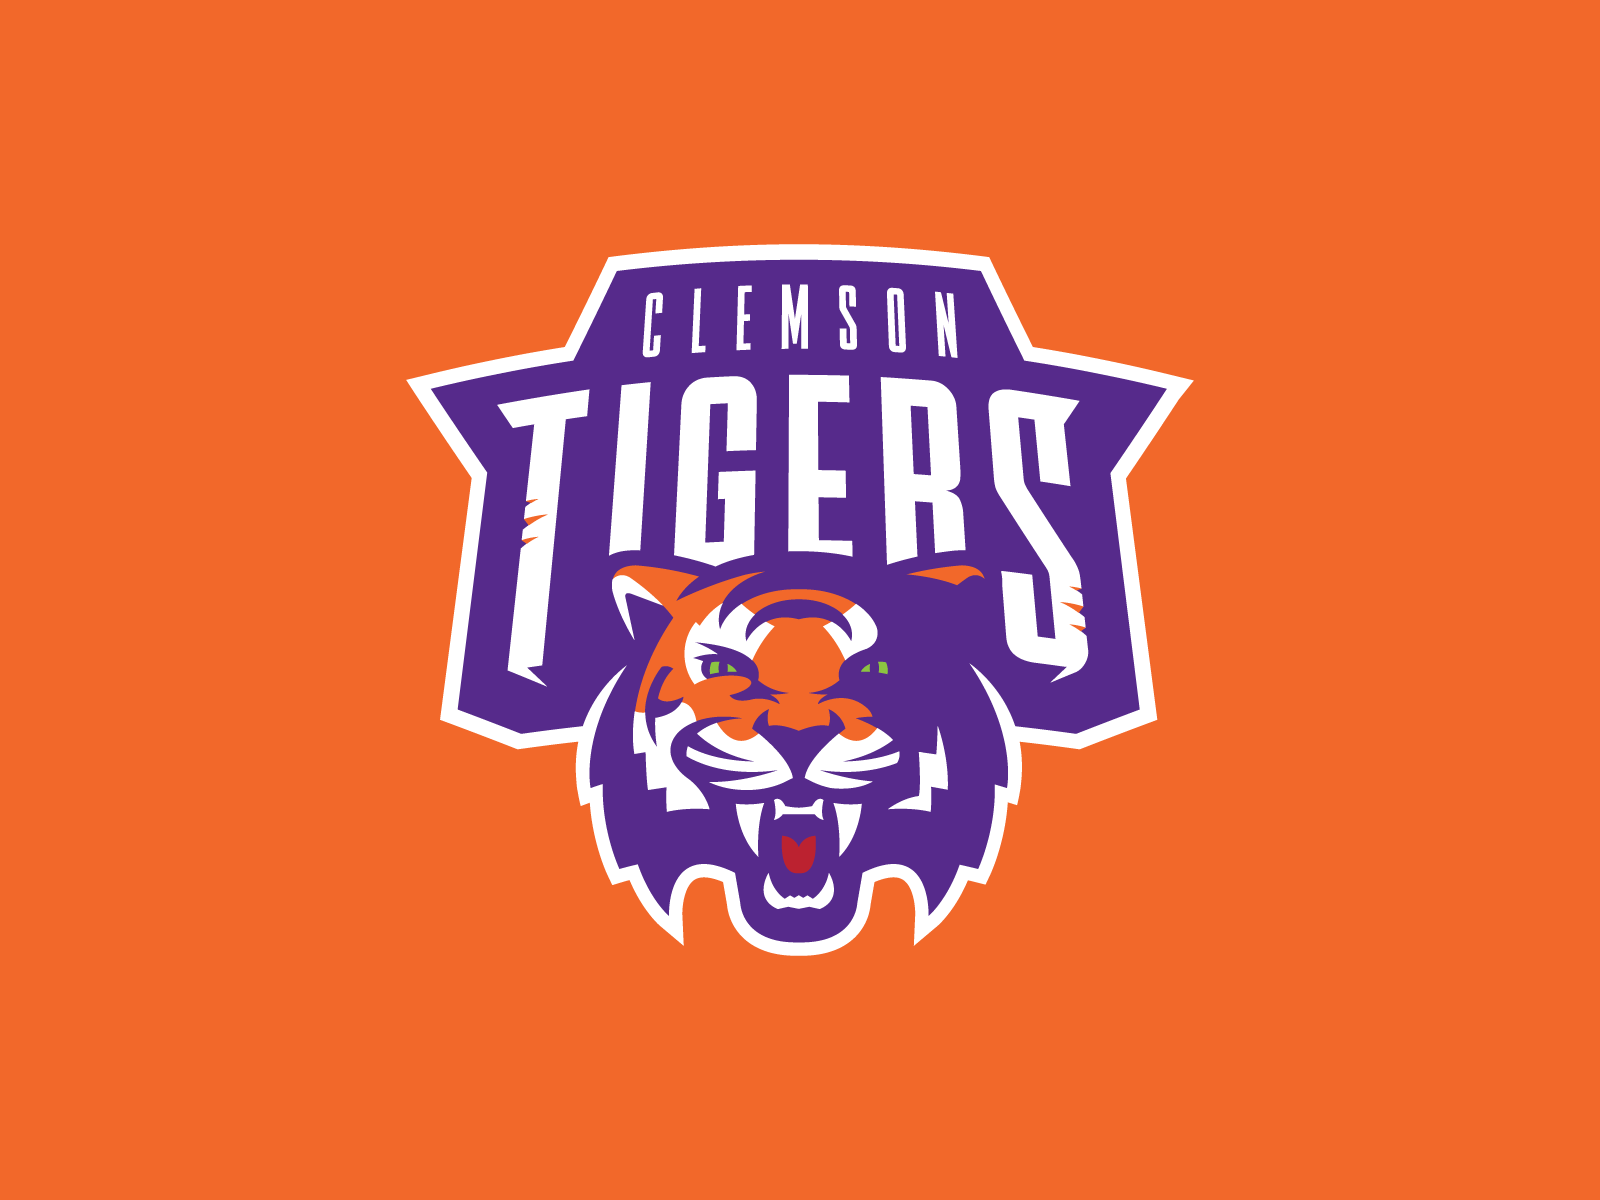 Roll Tigers - Clemson Logo Concept by Sean McCarthy on Dribbble